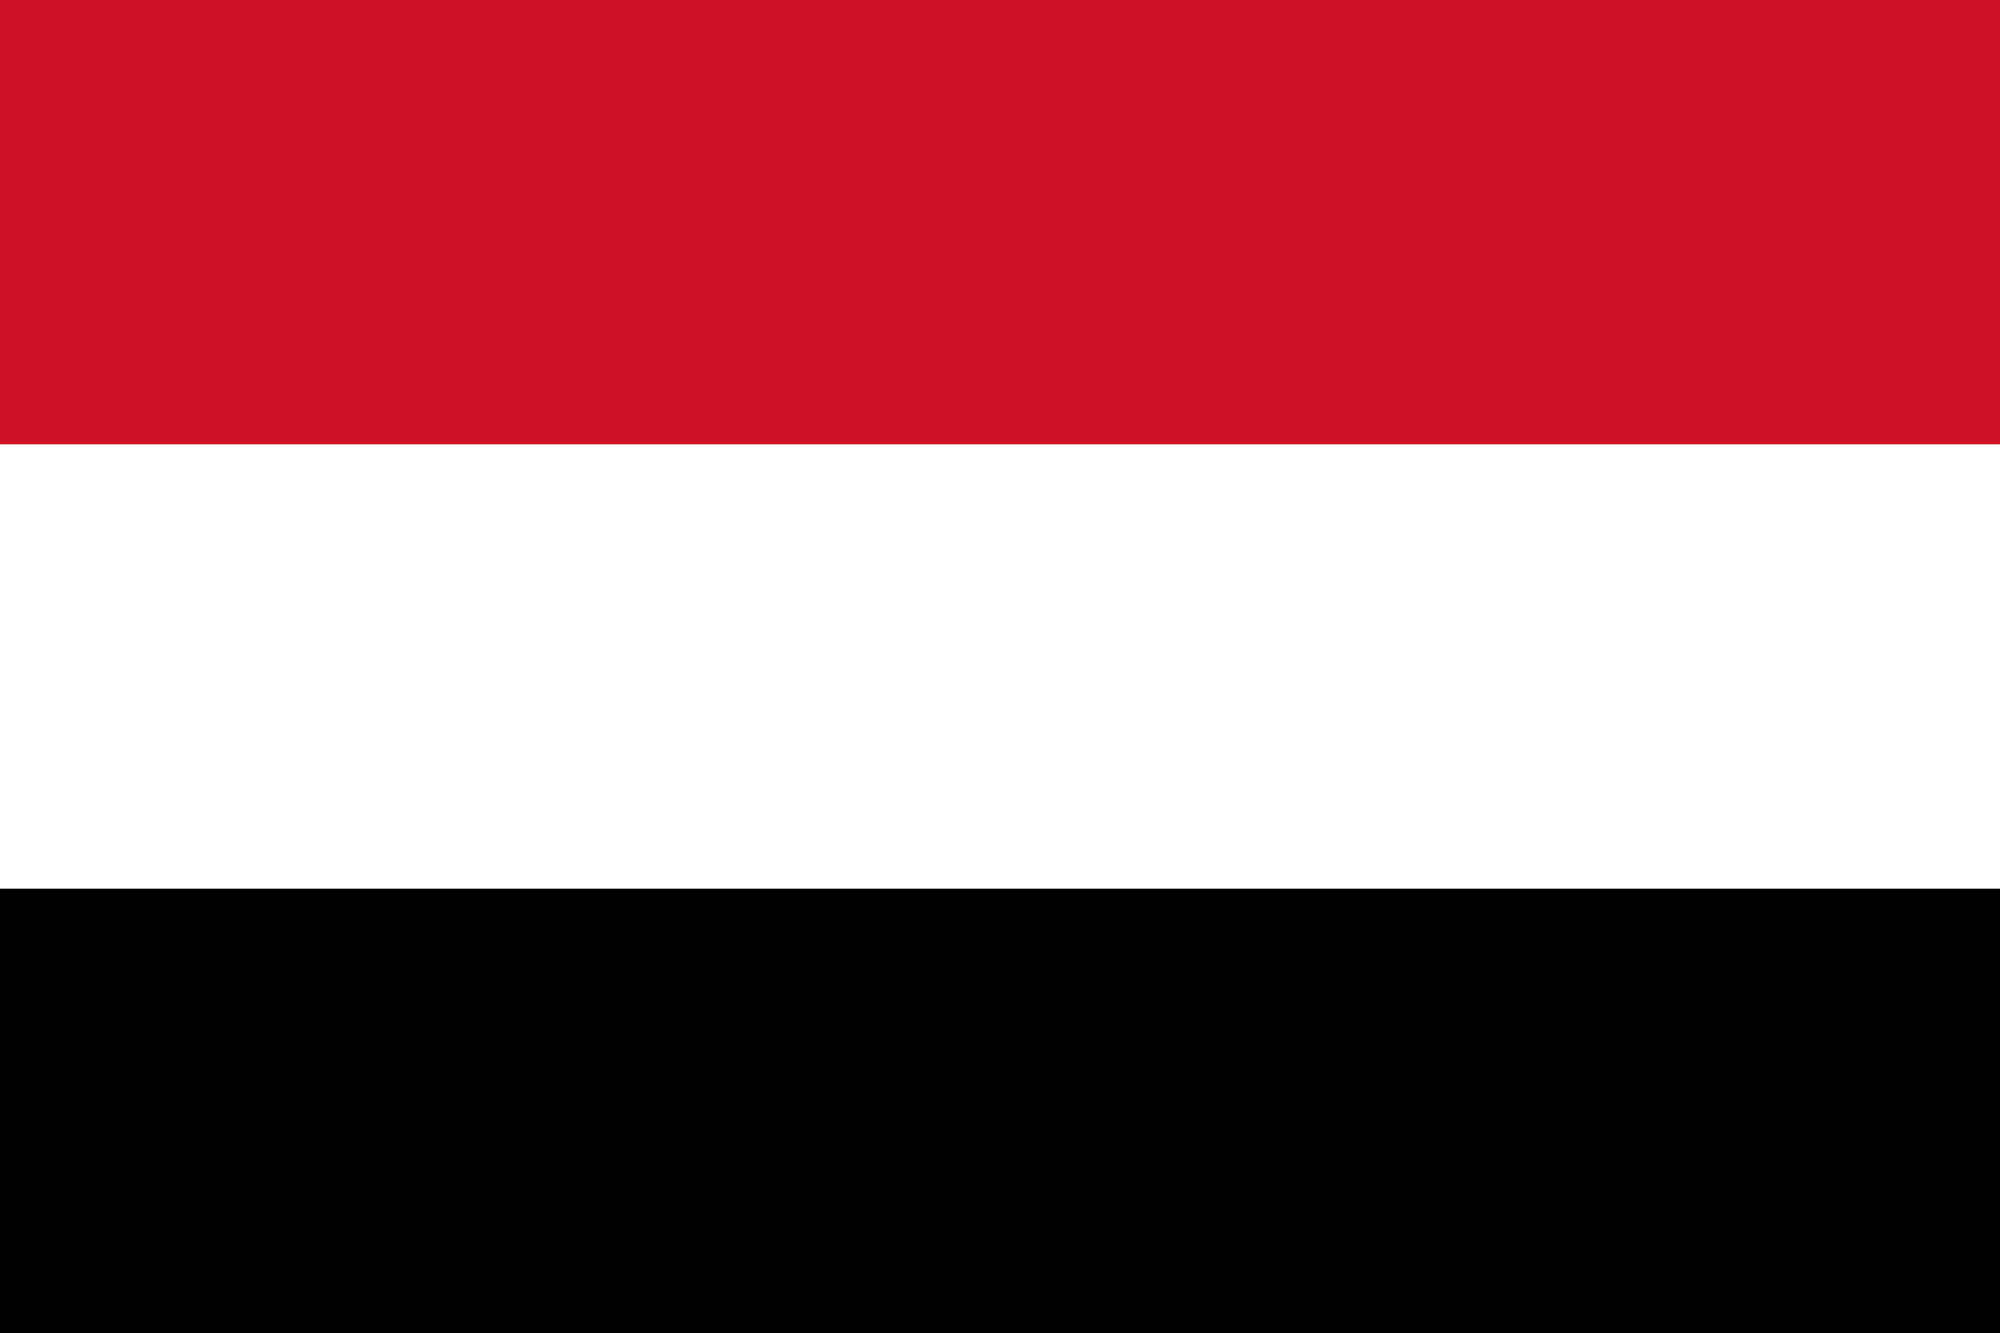 Houthis free 290 Yemenis in unilateral release - Red Cross